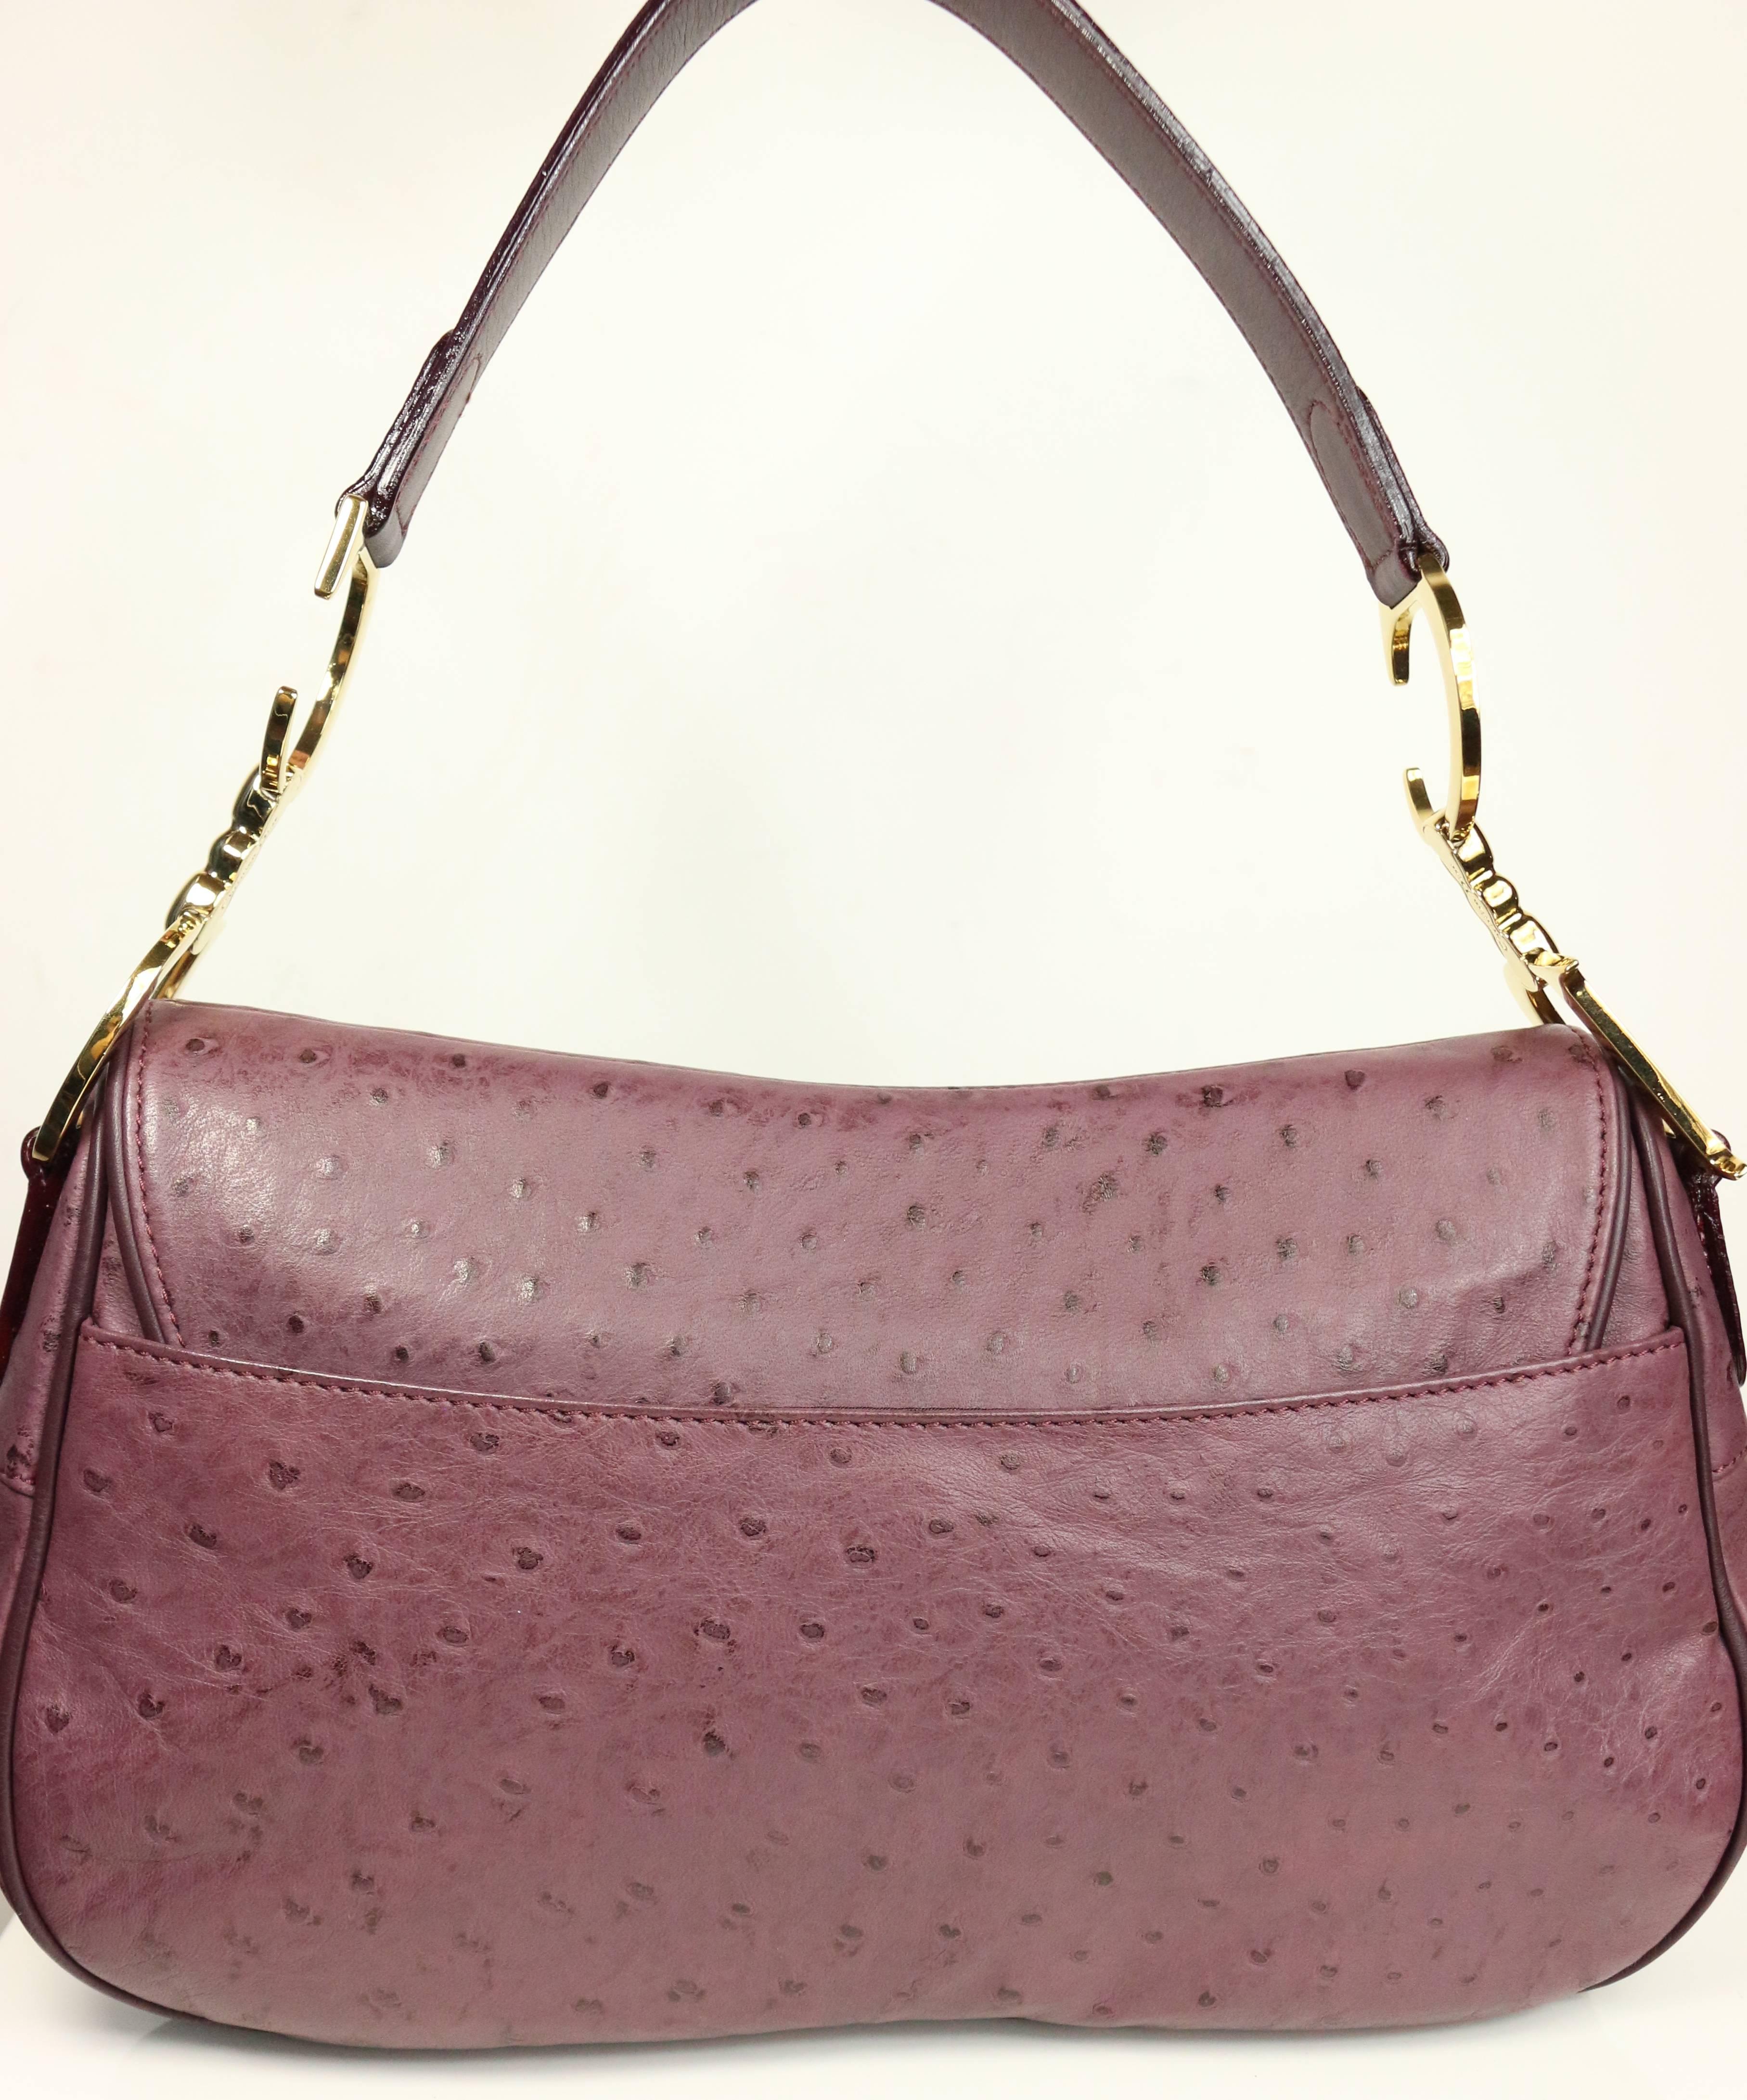 - Christian Dior aubergine double saddle handbag is finished in exotic Ostrich-skin with a front flap "CD" charm, an exterior back pocket, an interior zipper pocket and a beautiful crafted gold toned "CD" handle. This bag was a